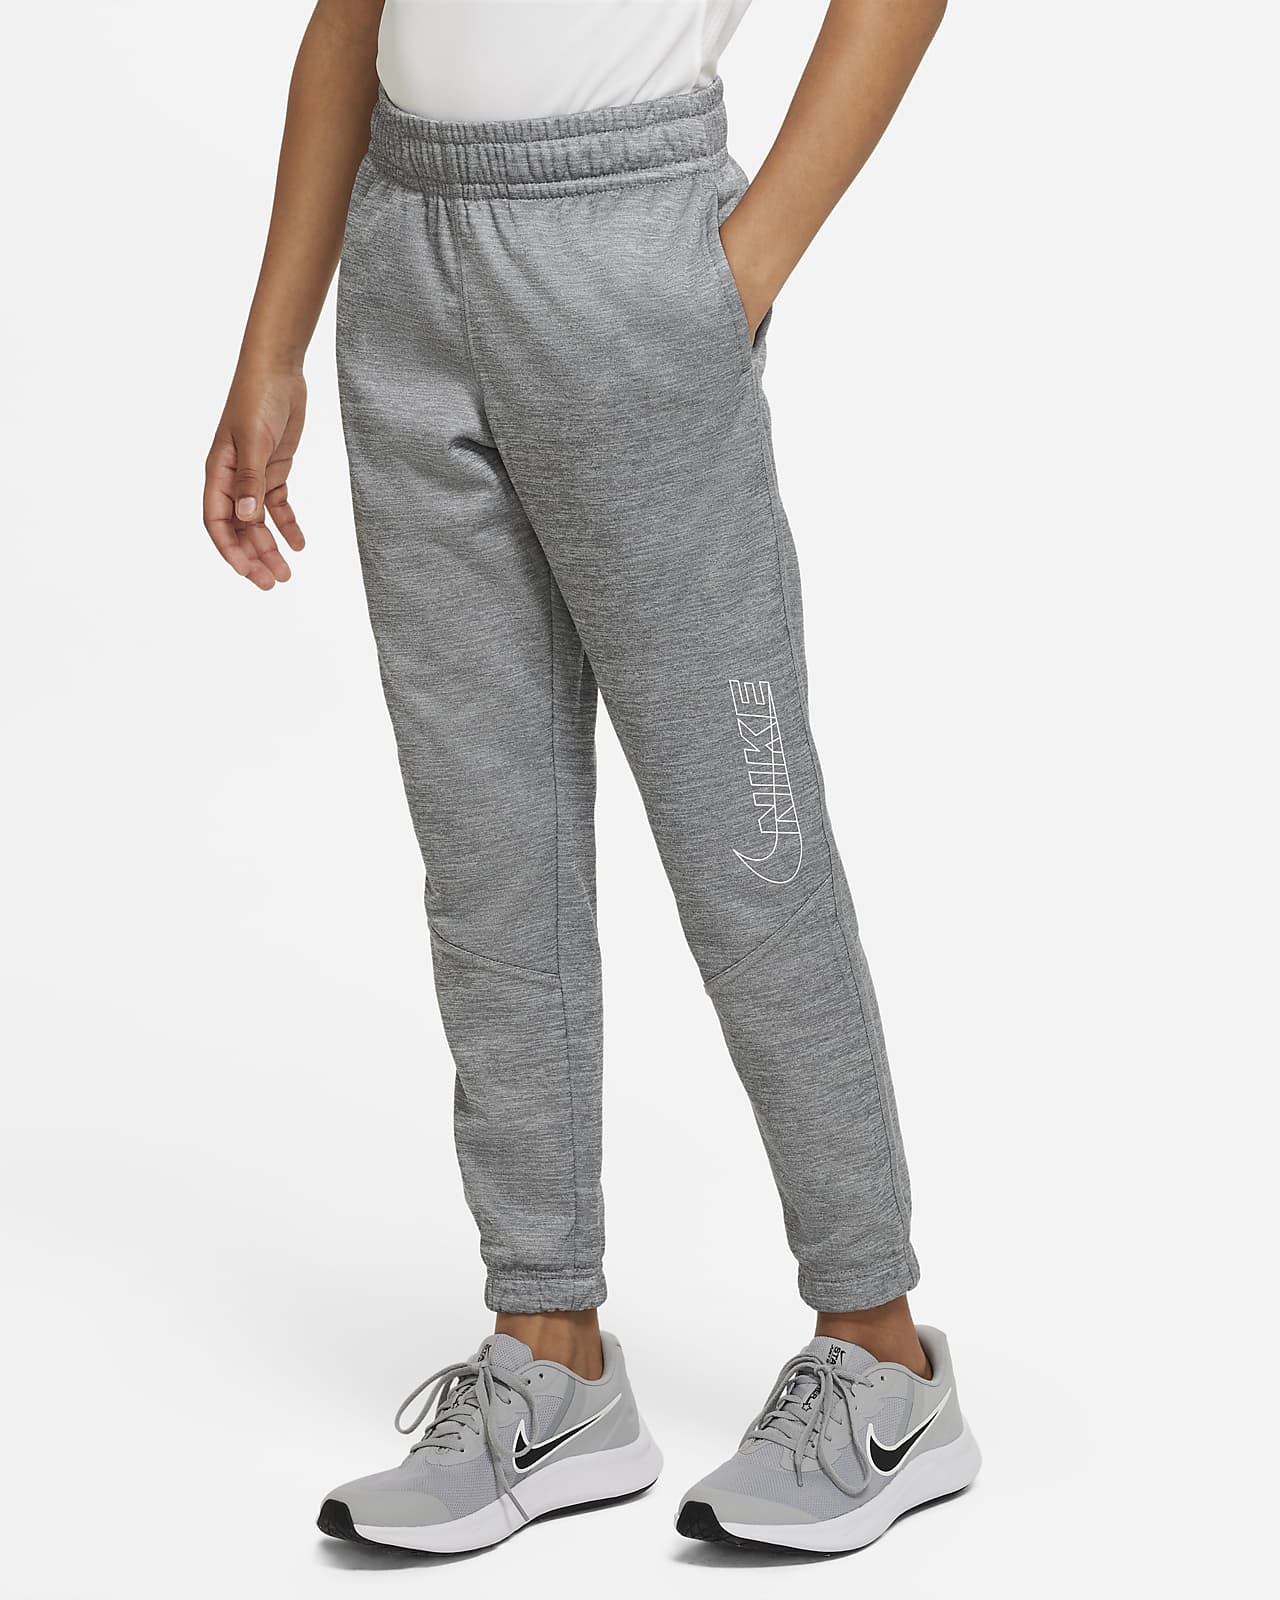 Nike Therma-FIT Older Kids' (Boys') Graphic Tapered Training Trousers